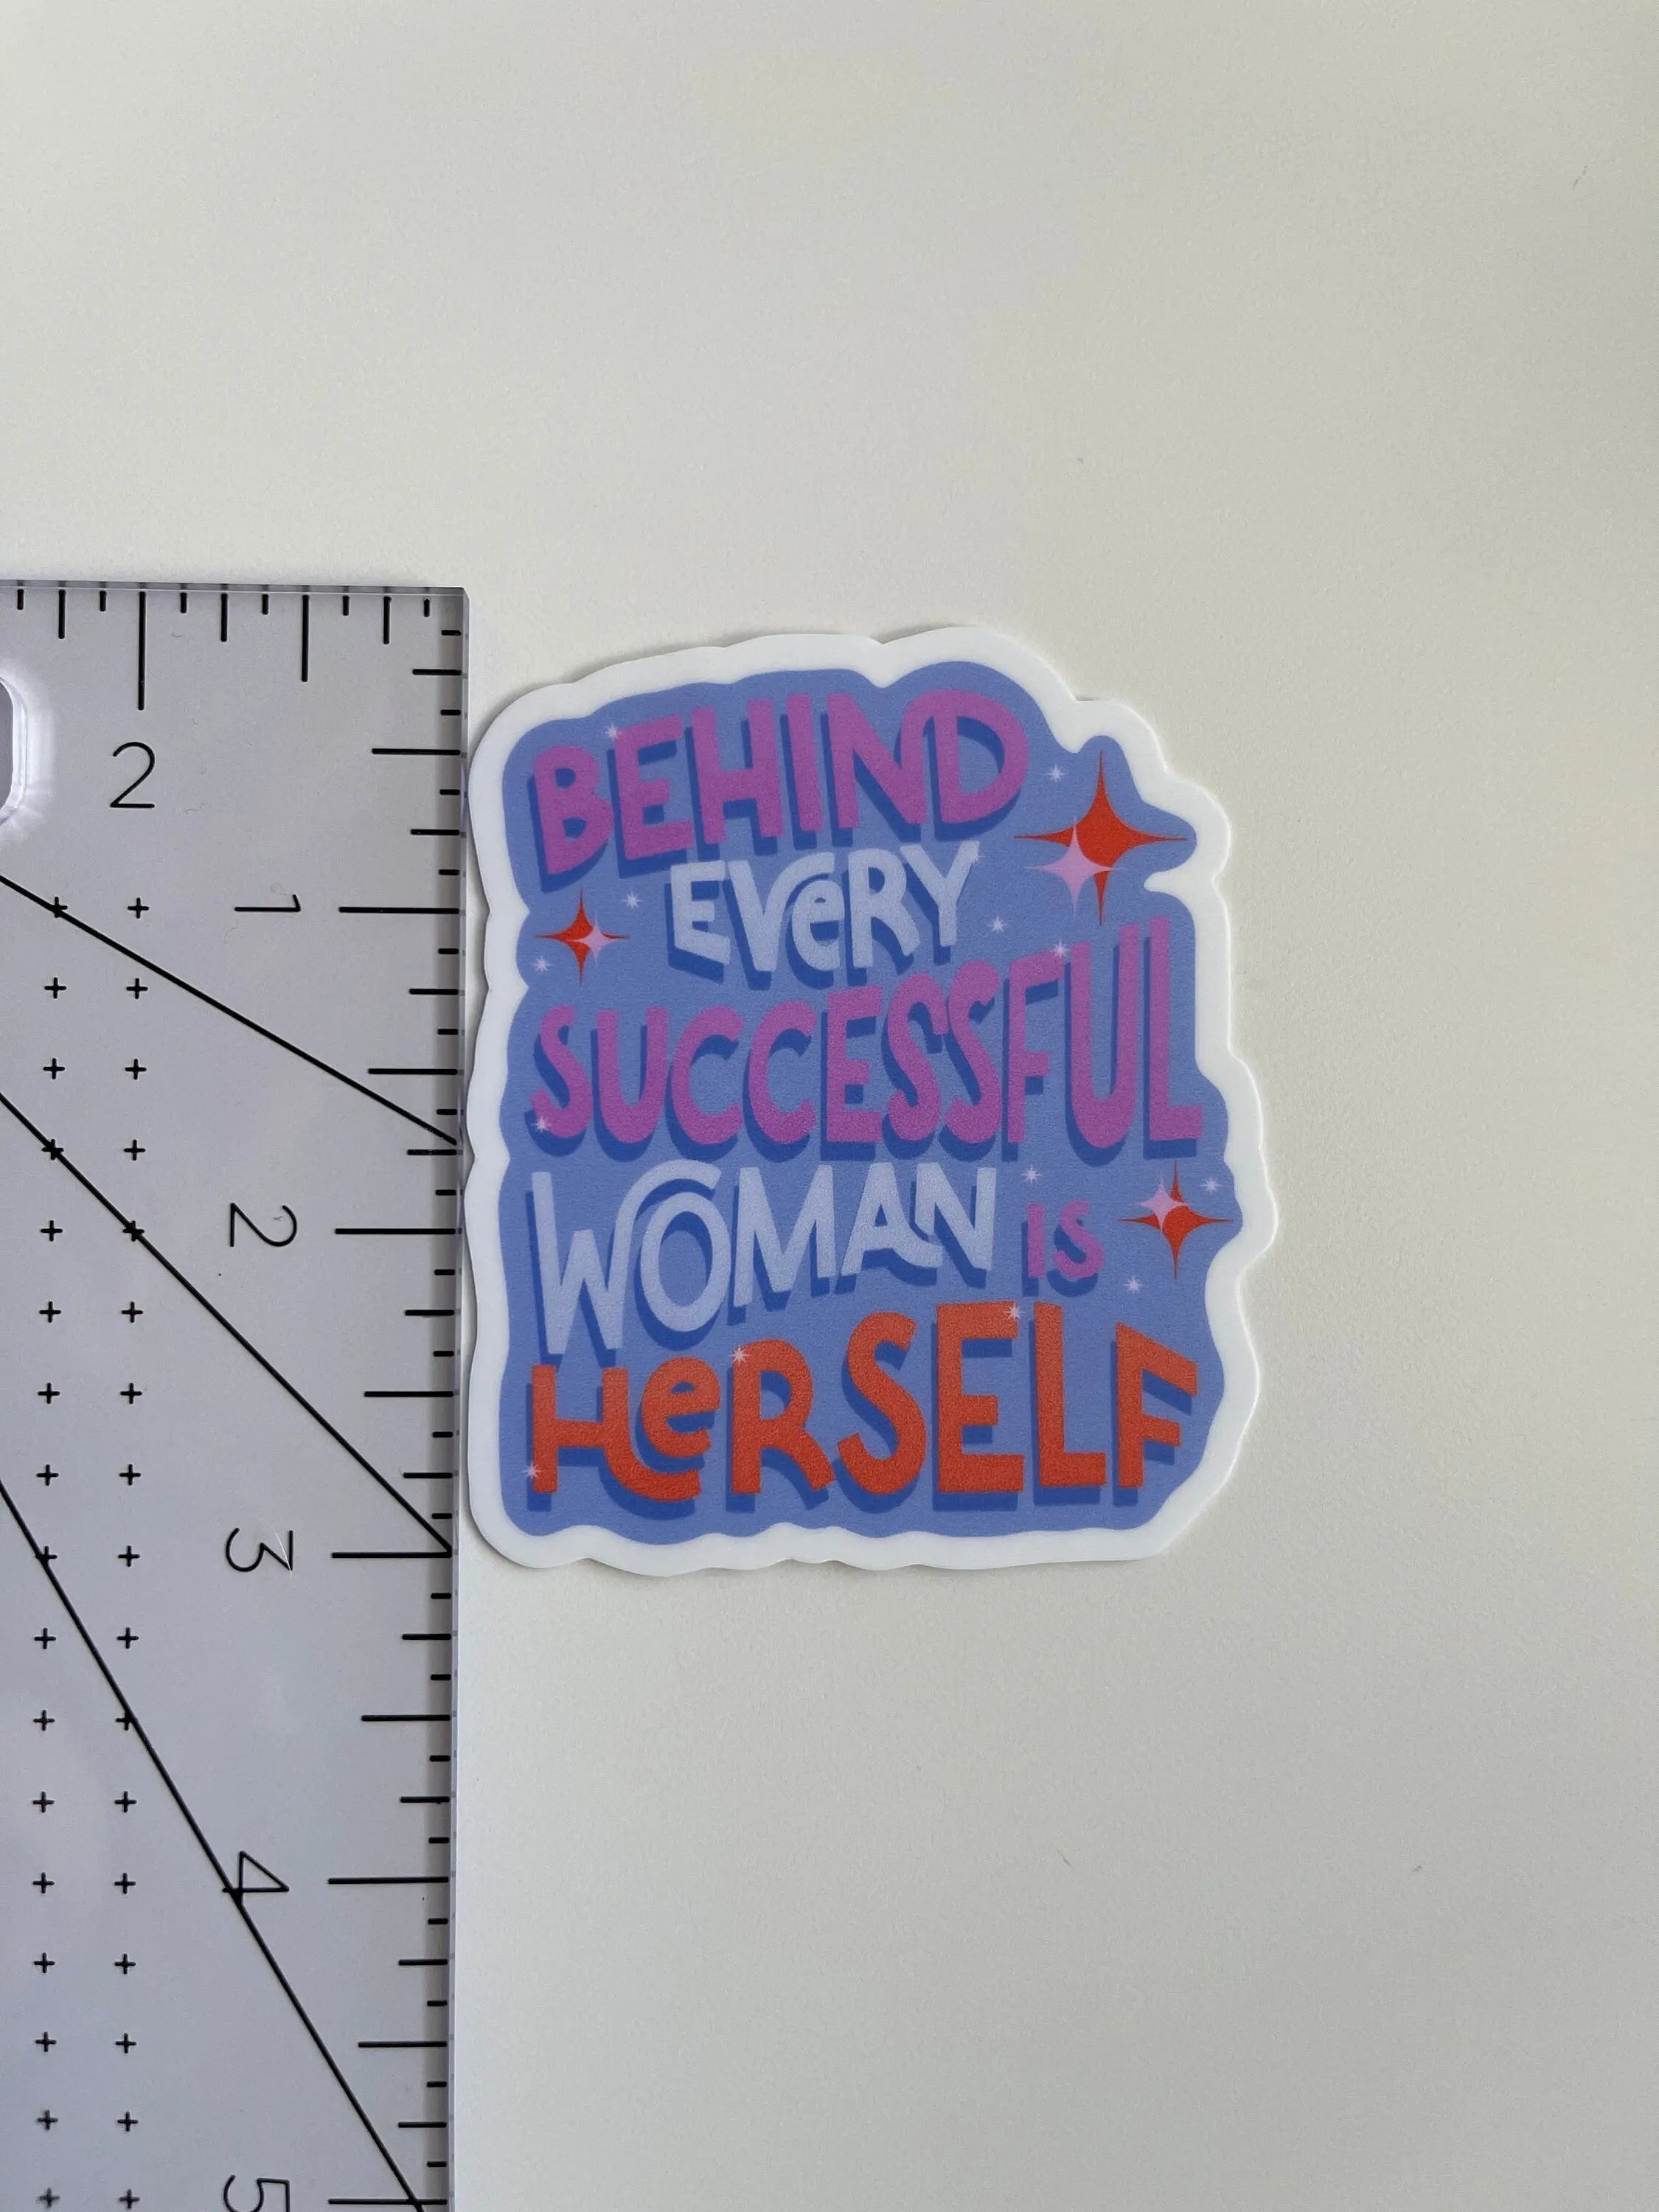 Behind Every Successful Woman is Herself sticker MangoIllustrated